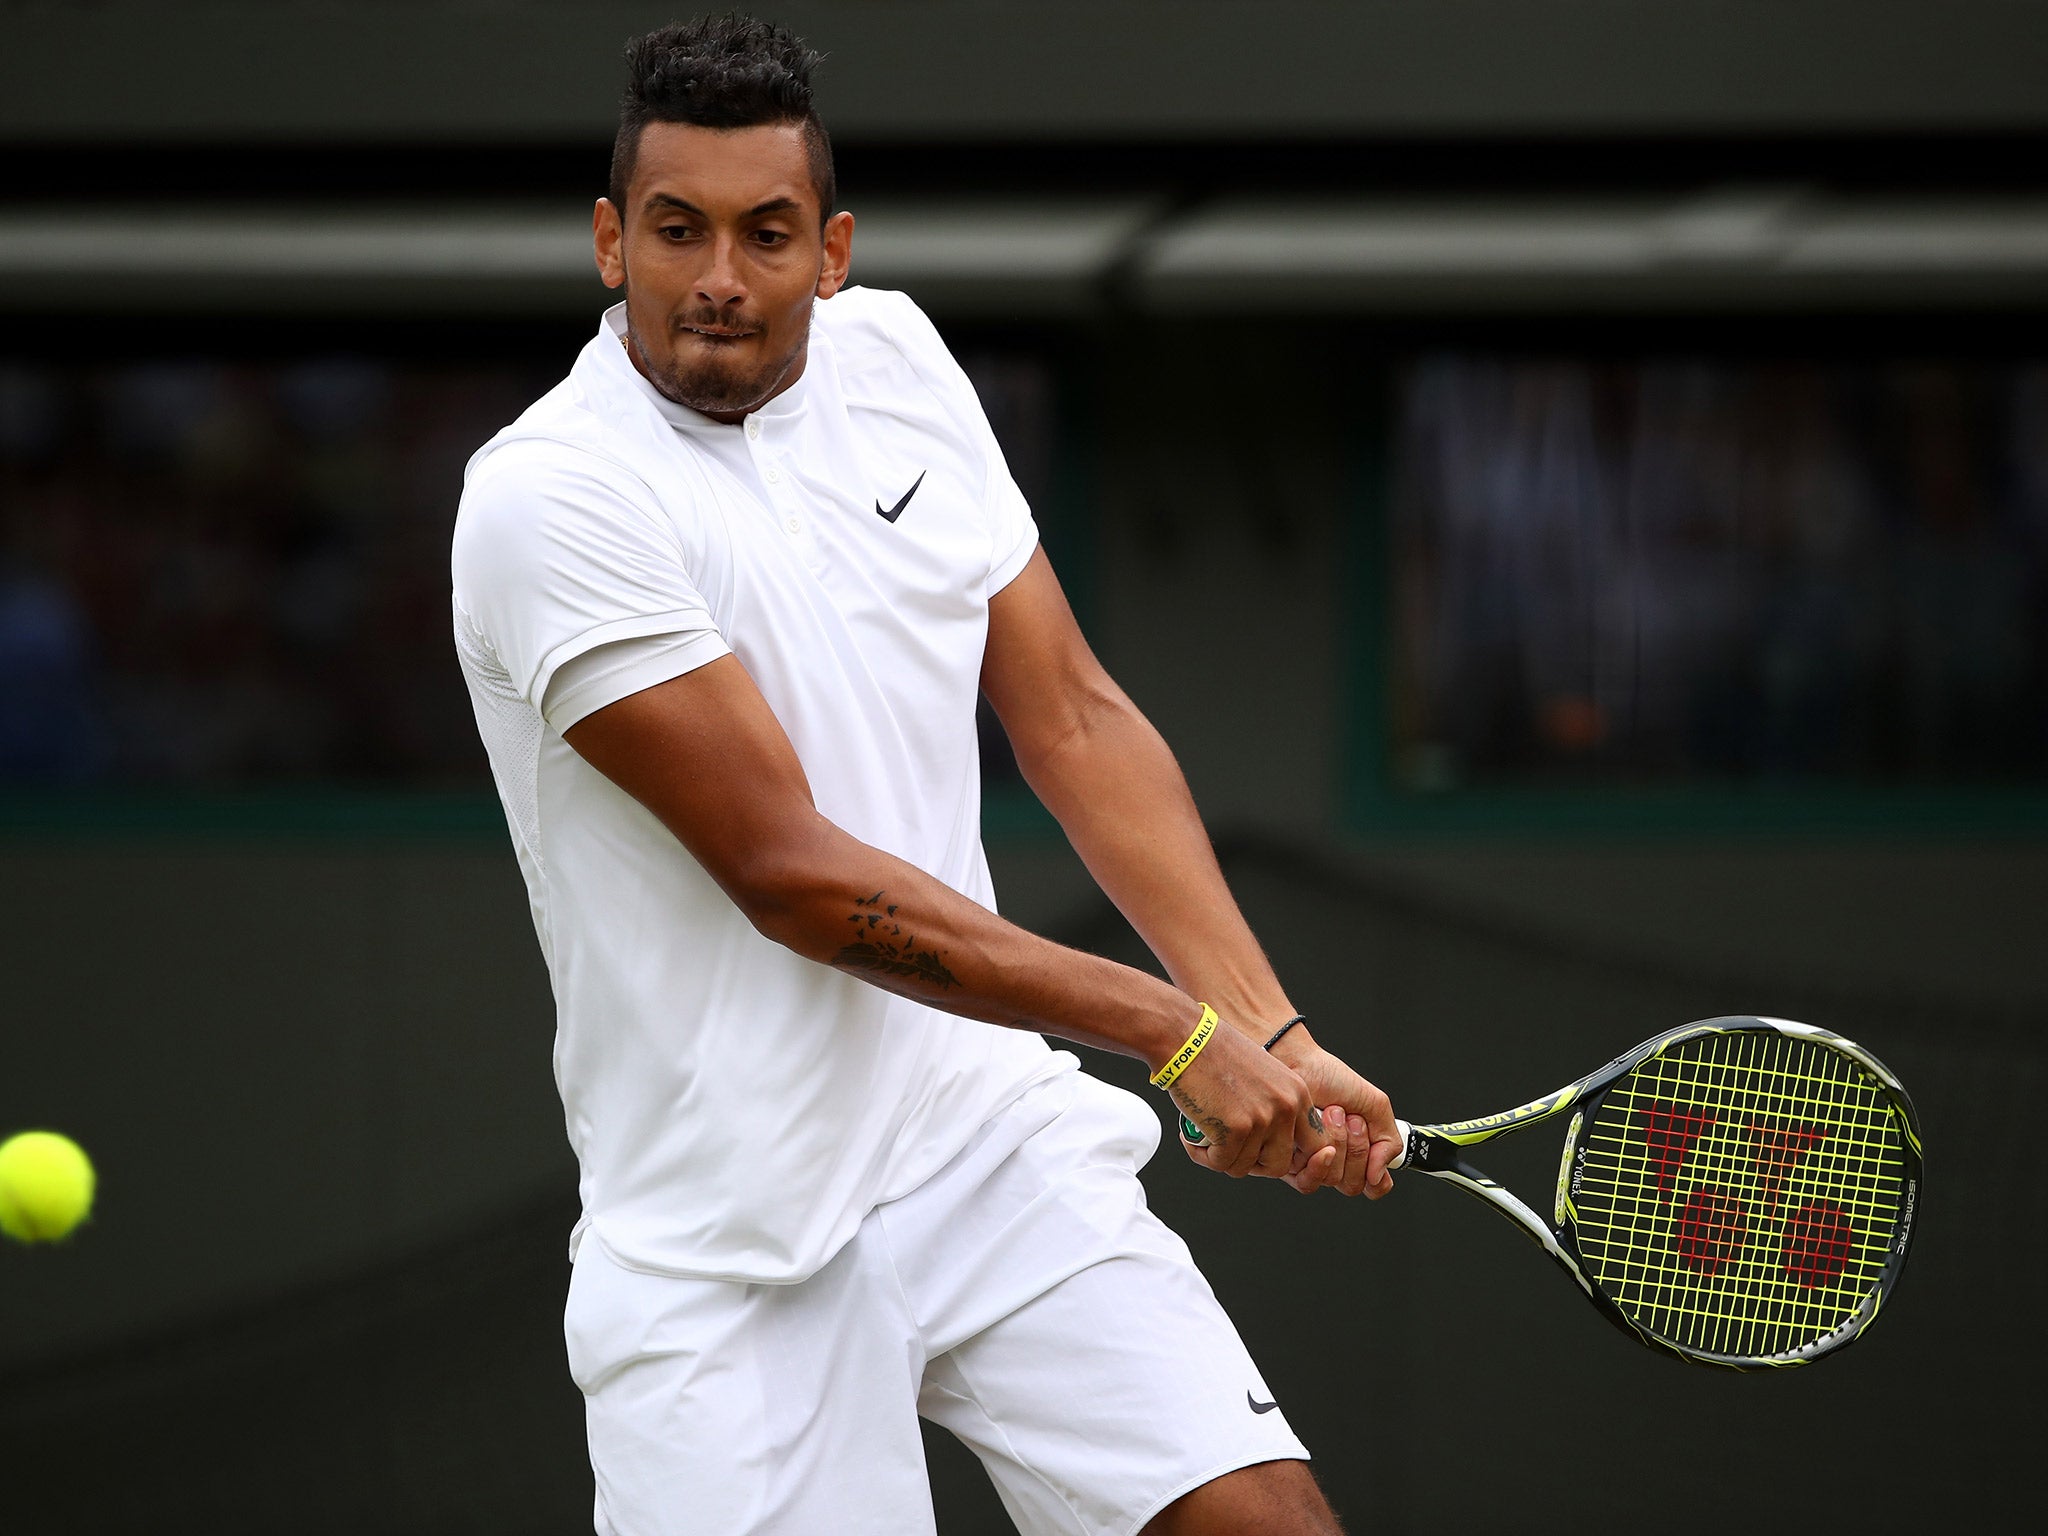 Nick Kyrgios is looking forward to going up against home favourite Andy Murray